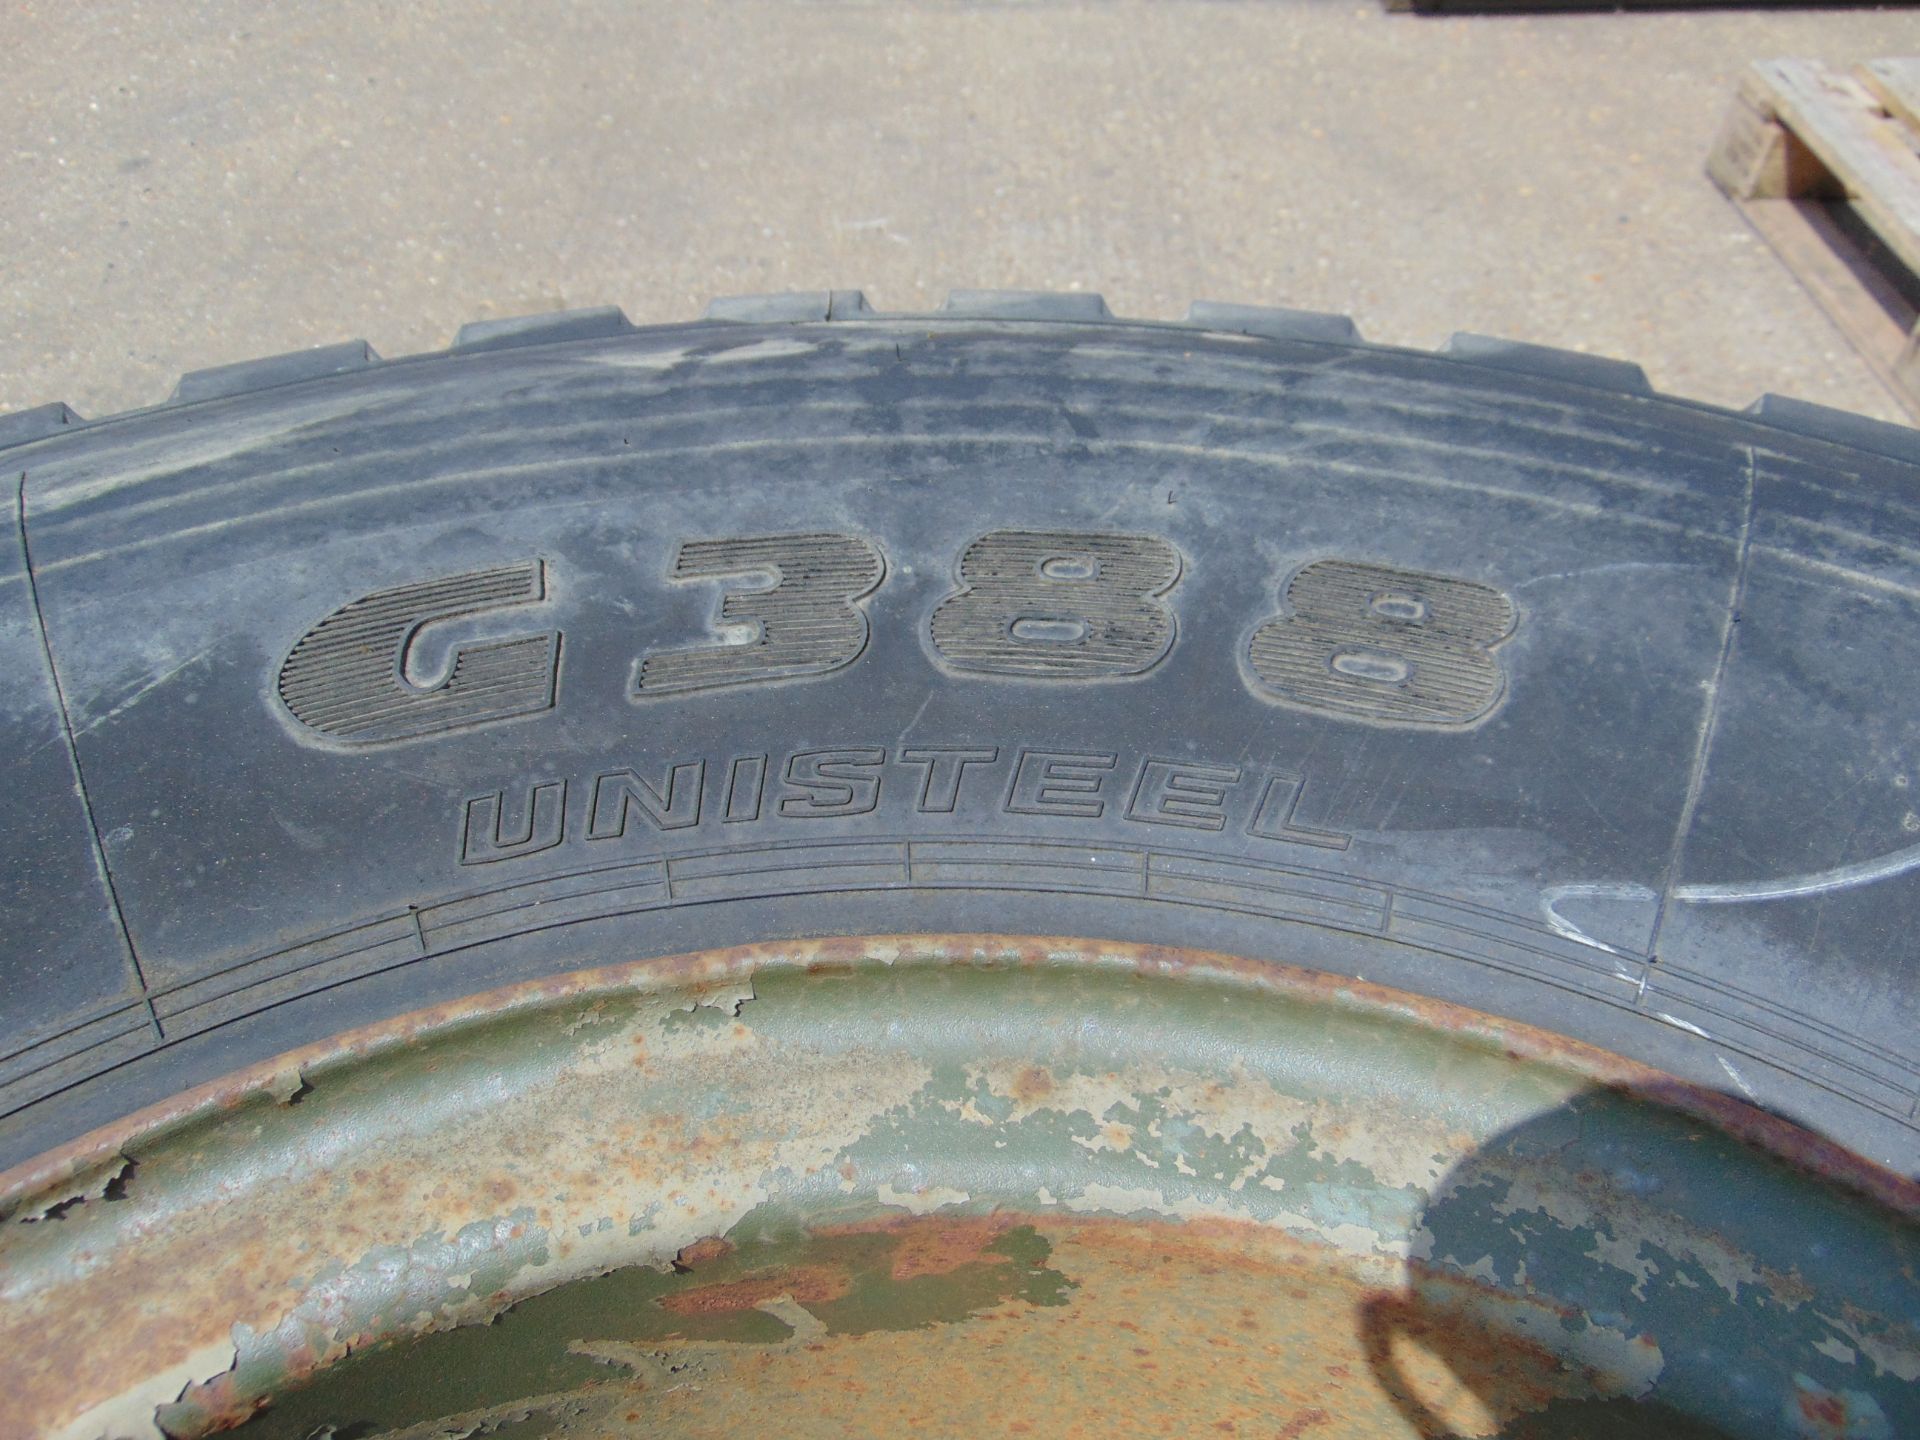 2x Goodyear G388 12.00 R20 Tyres on 8 Stud Rims - Image 6 of 7